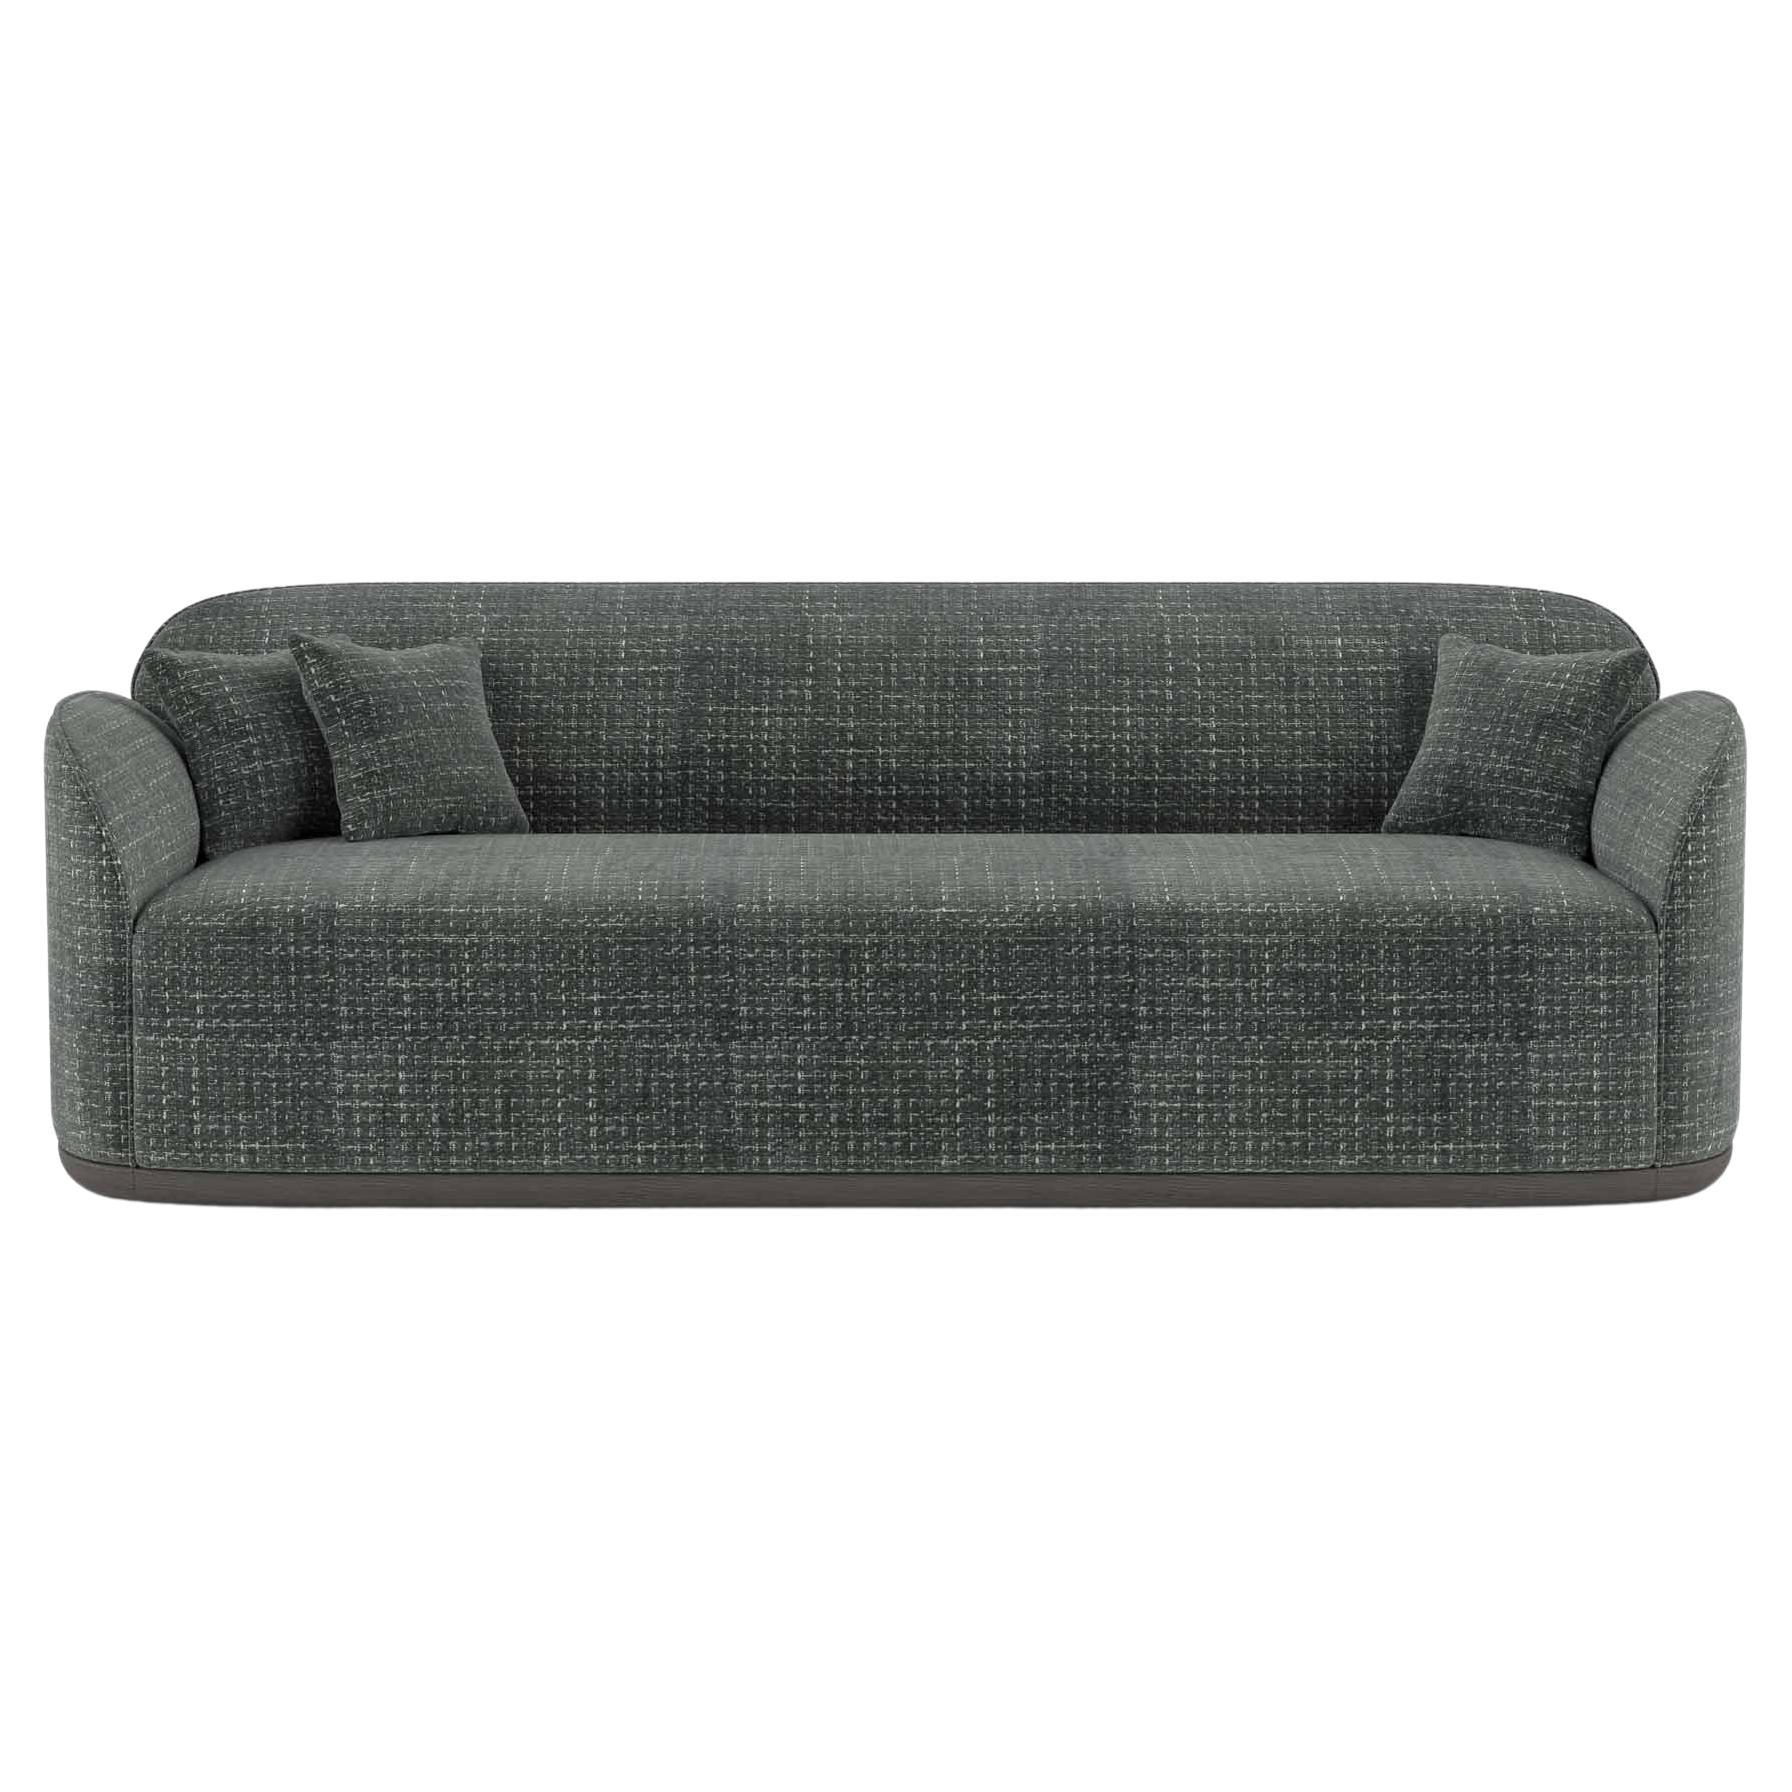 Contemporary Sofa 'Unio' by Poiat, 3 seaters, Fabric Chivasso Yang 95